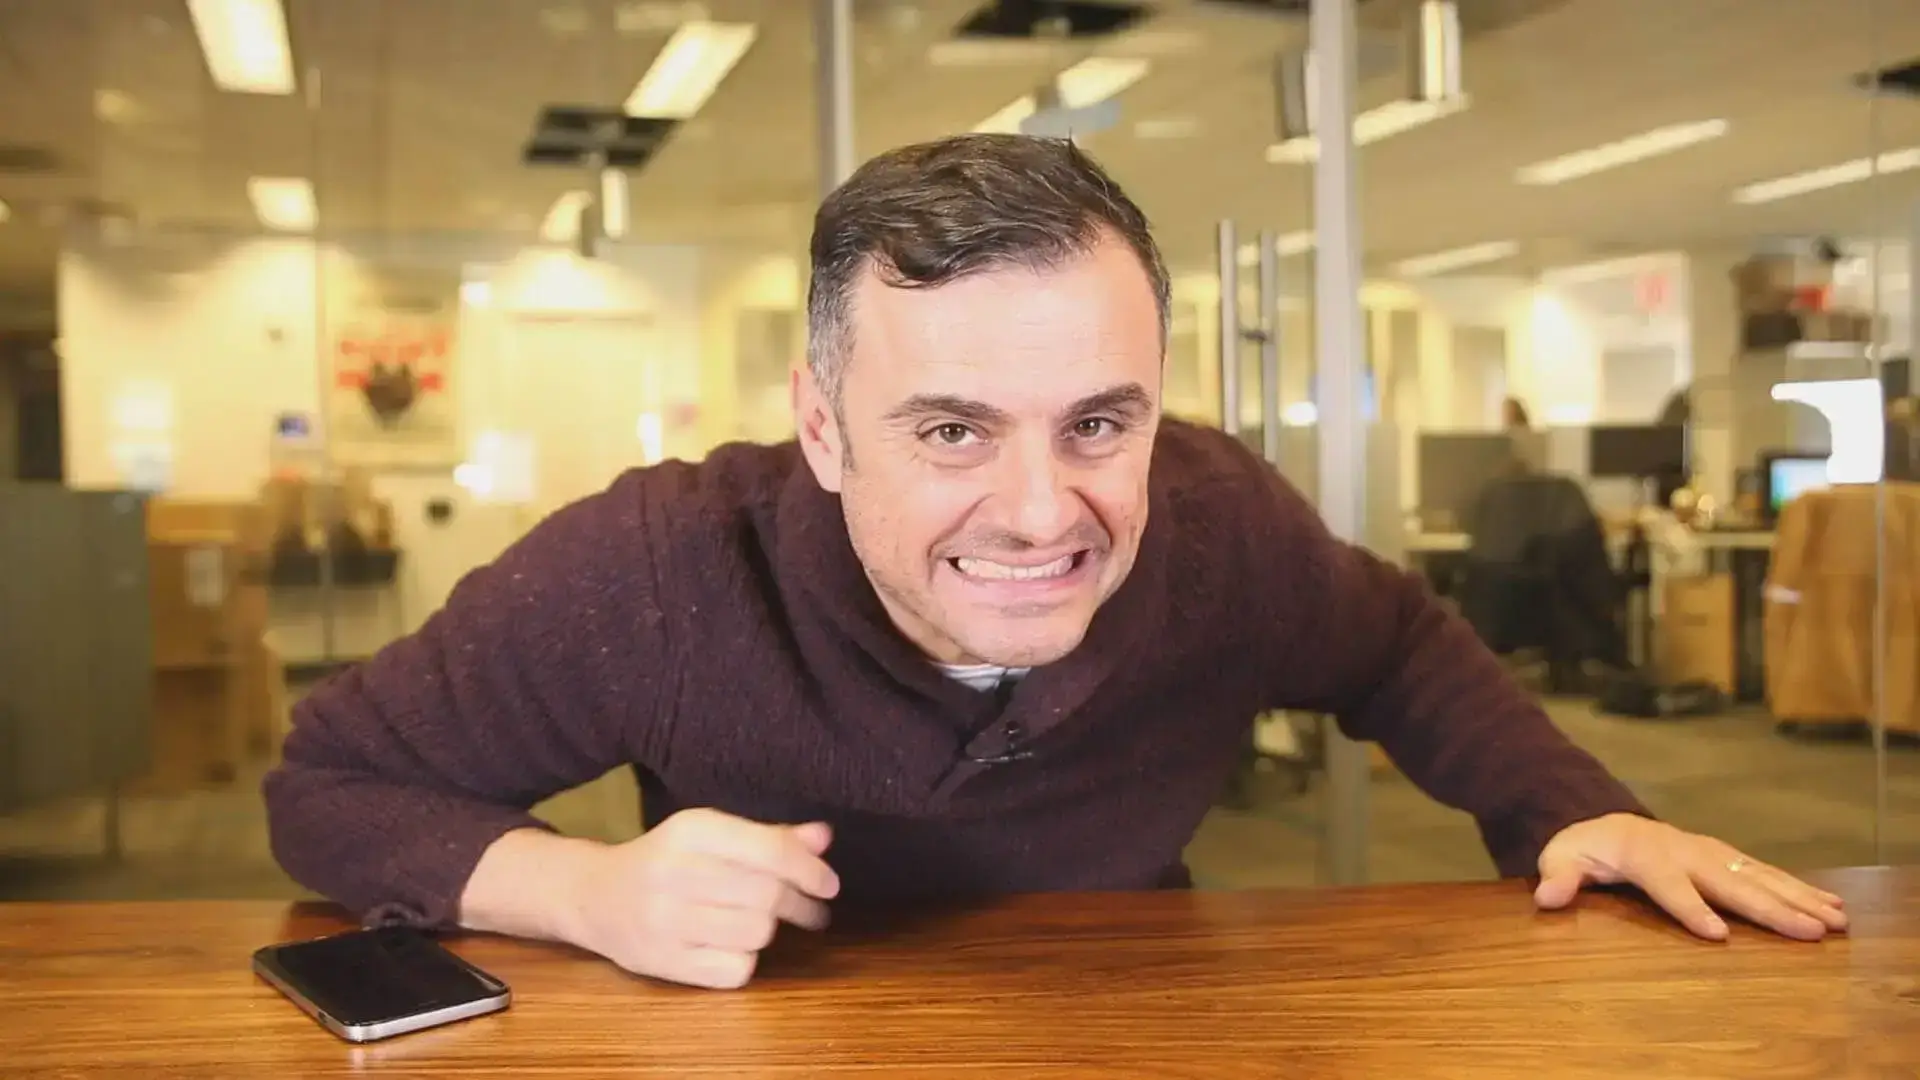 Gary Vee talking on his YouTube channel.